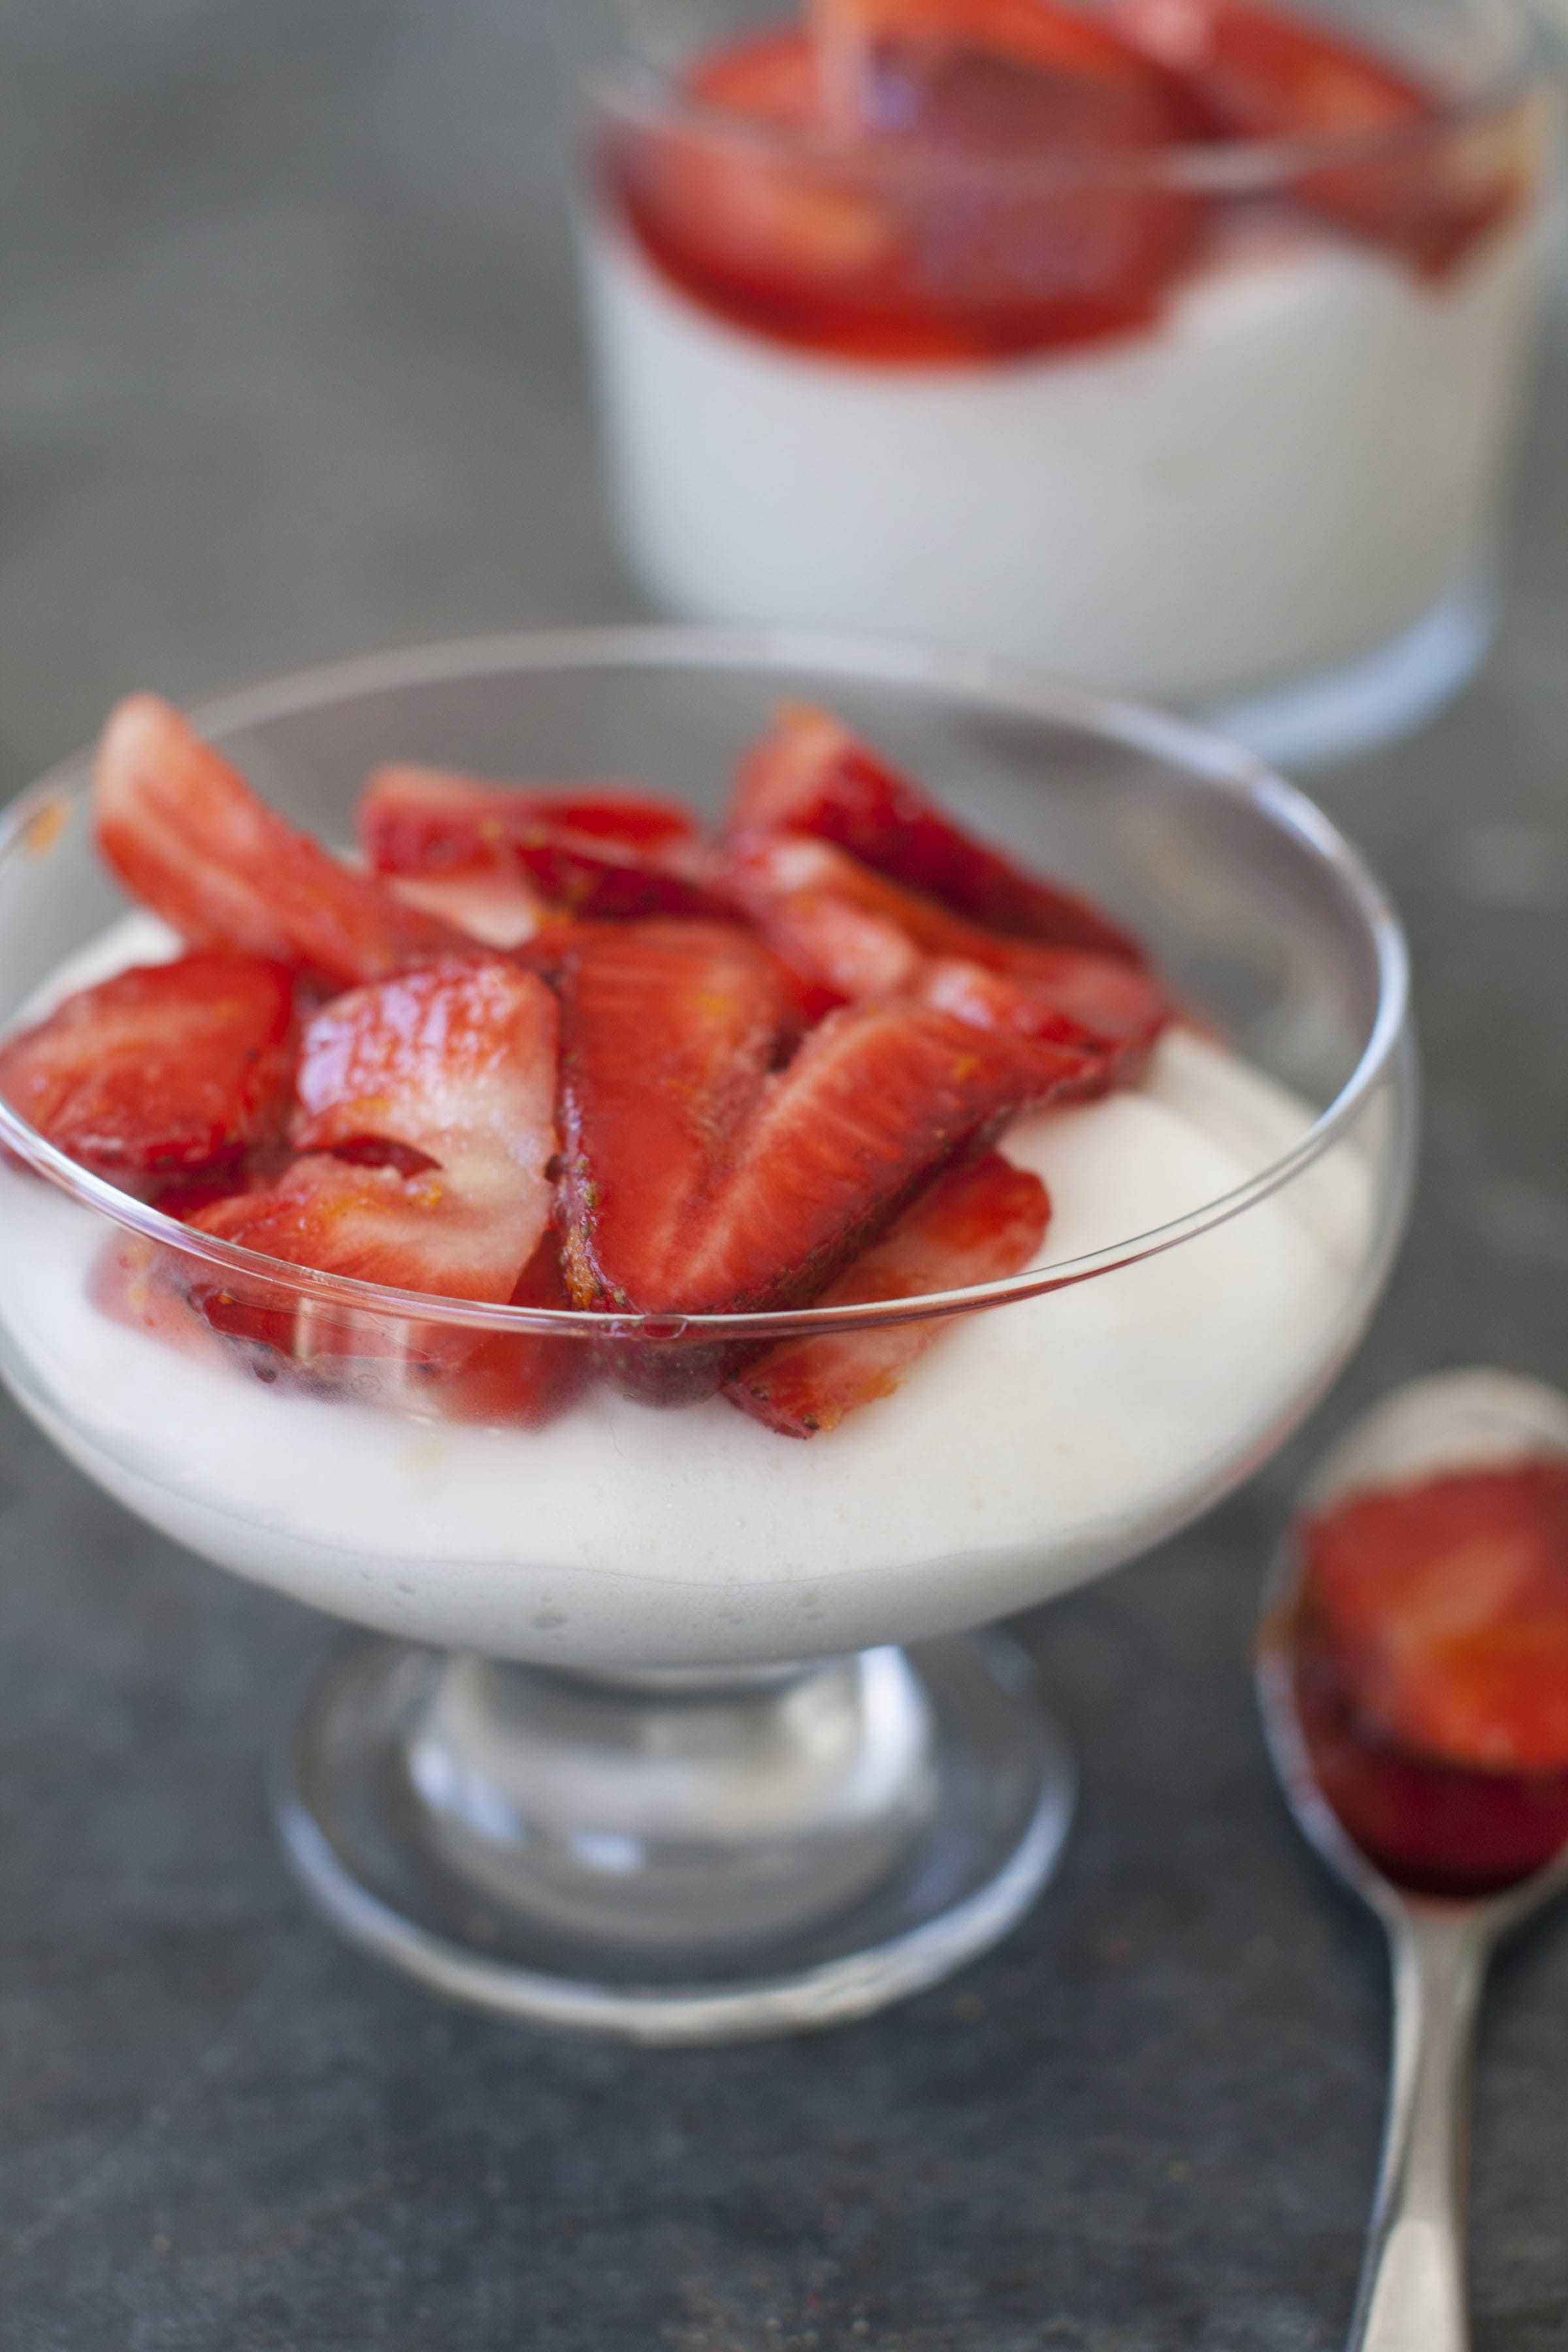 Snow Pudding With Spiked Strawberries.